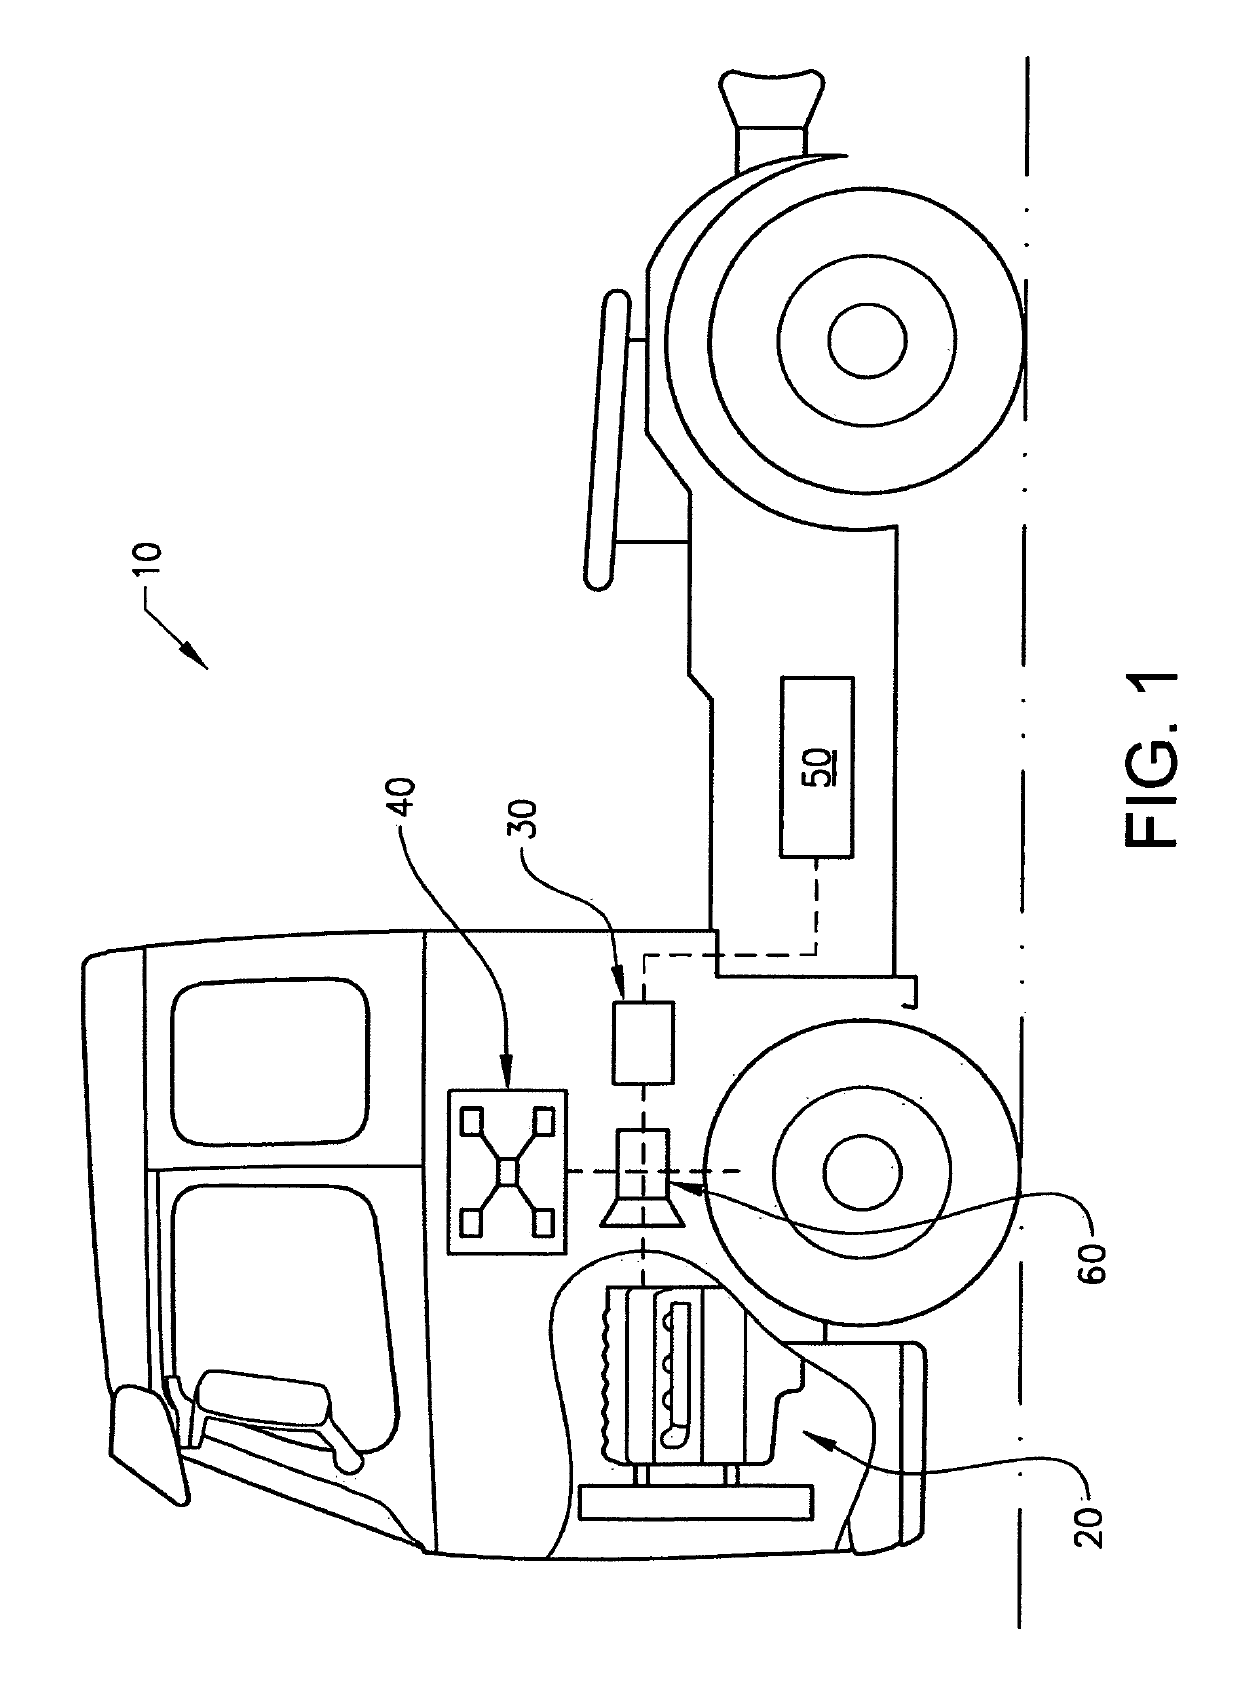 Method performed by a control unit for controlling energy flows of a vehicle